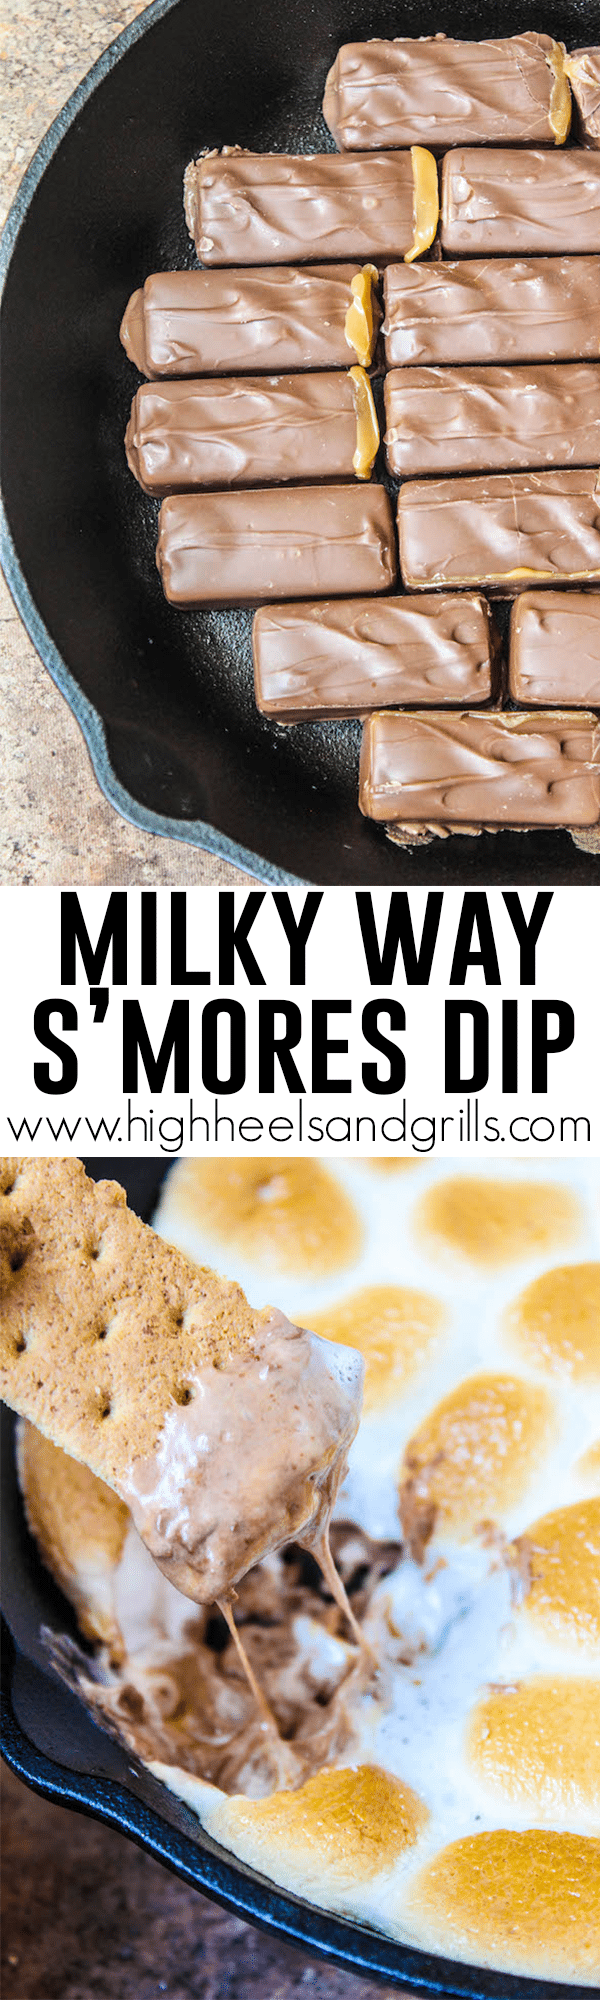 Milky Way S'mores Dip - If you've never eaten s'mores dip, you have to start with this one!